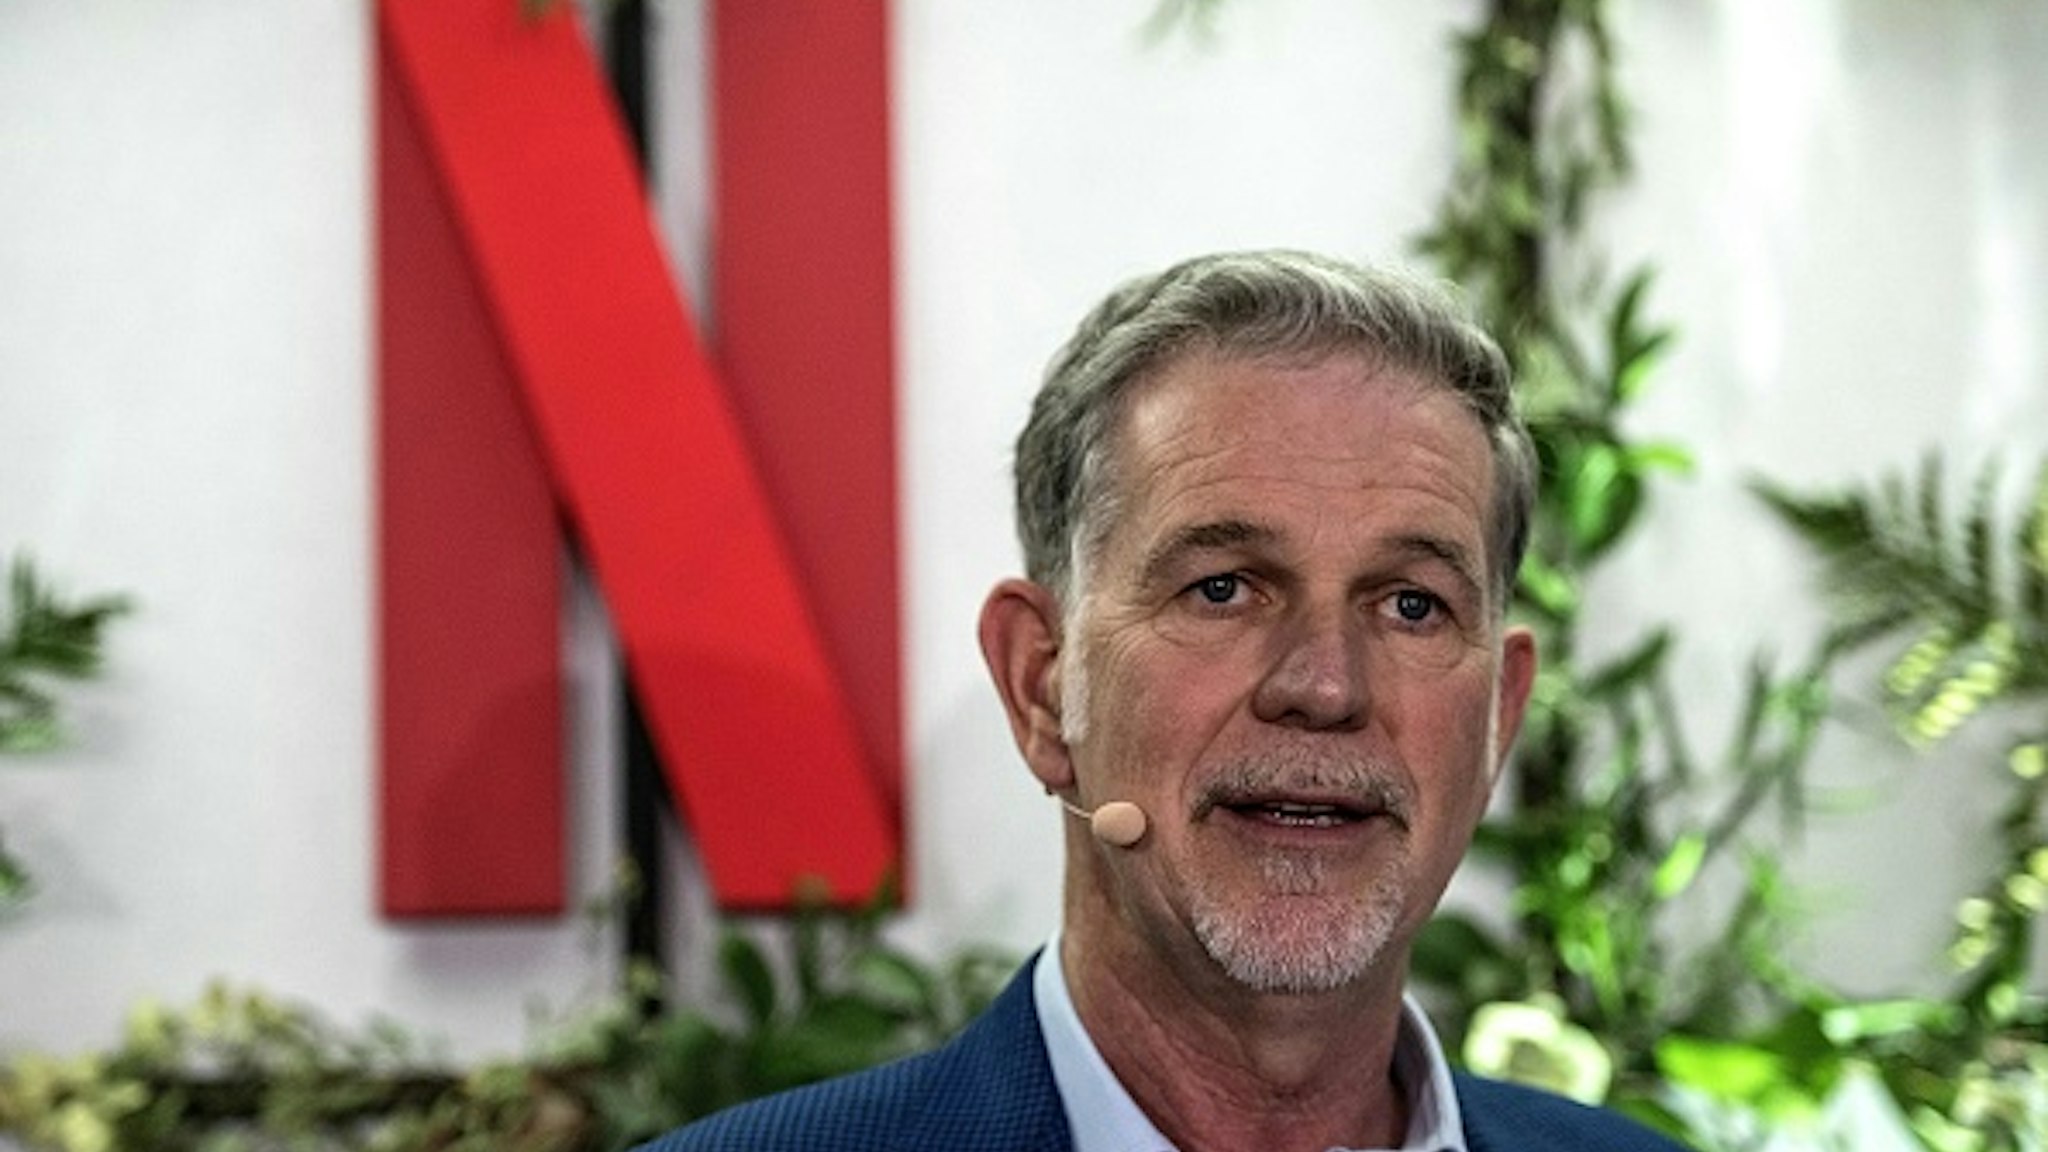 Co-founder and director of Netflix Reed Hastings delivers a speech as he inaugurates the new offices of Netflix France, in Paris on January 17, 2020. - Hastings announced some 20 French projects by Netflix on January 17, 2020.